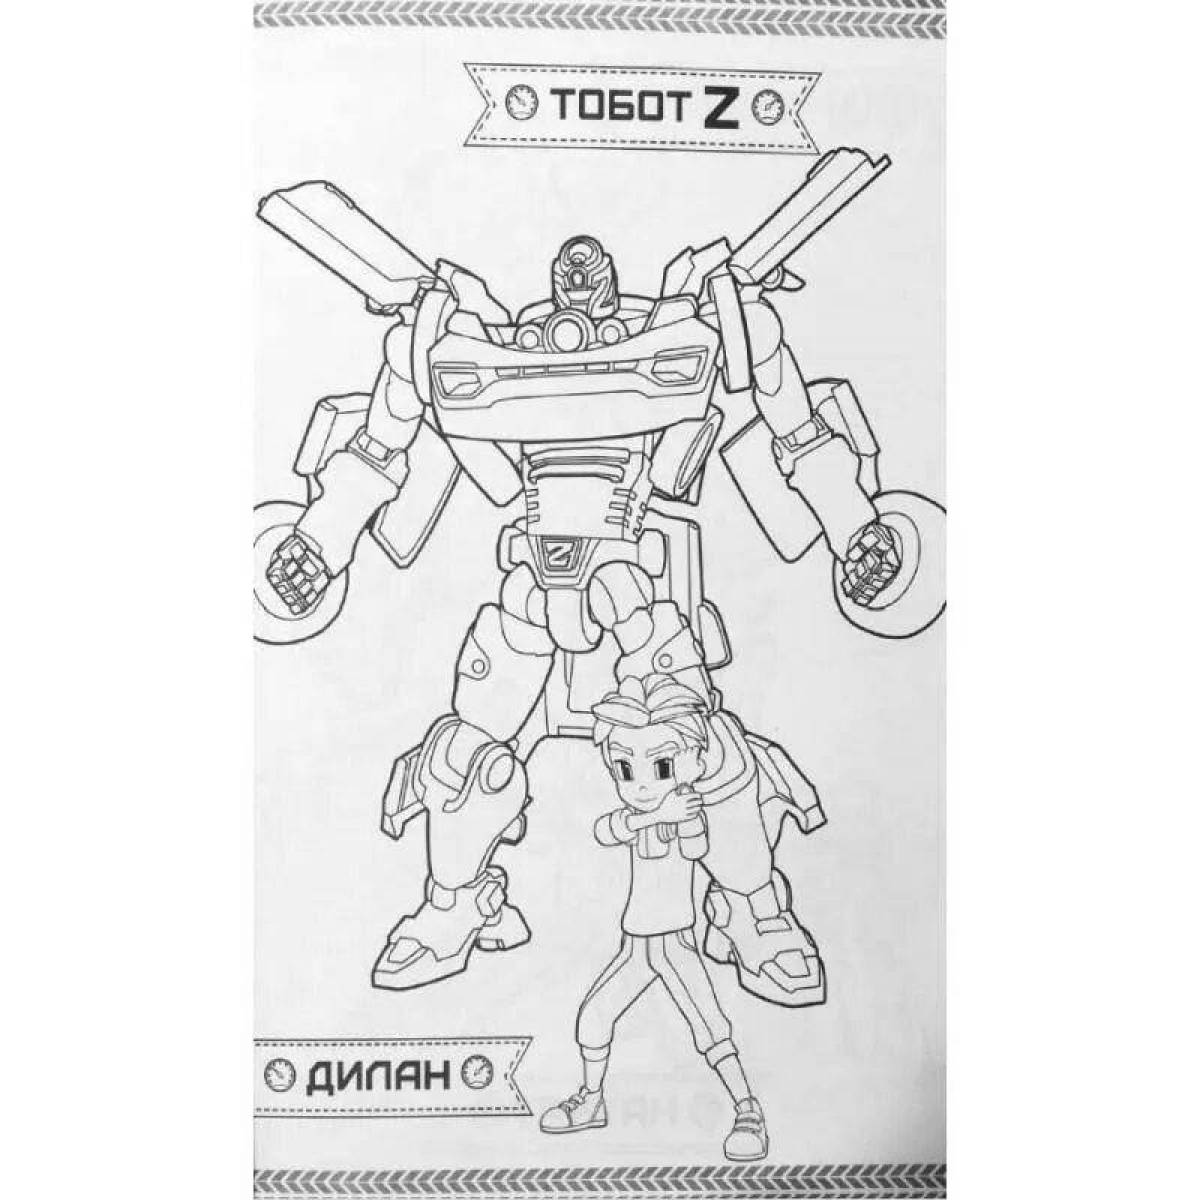 Charming tobot x coloring book